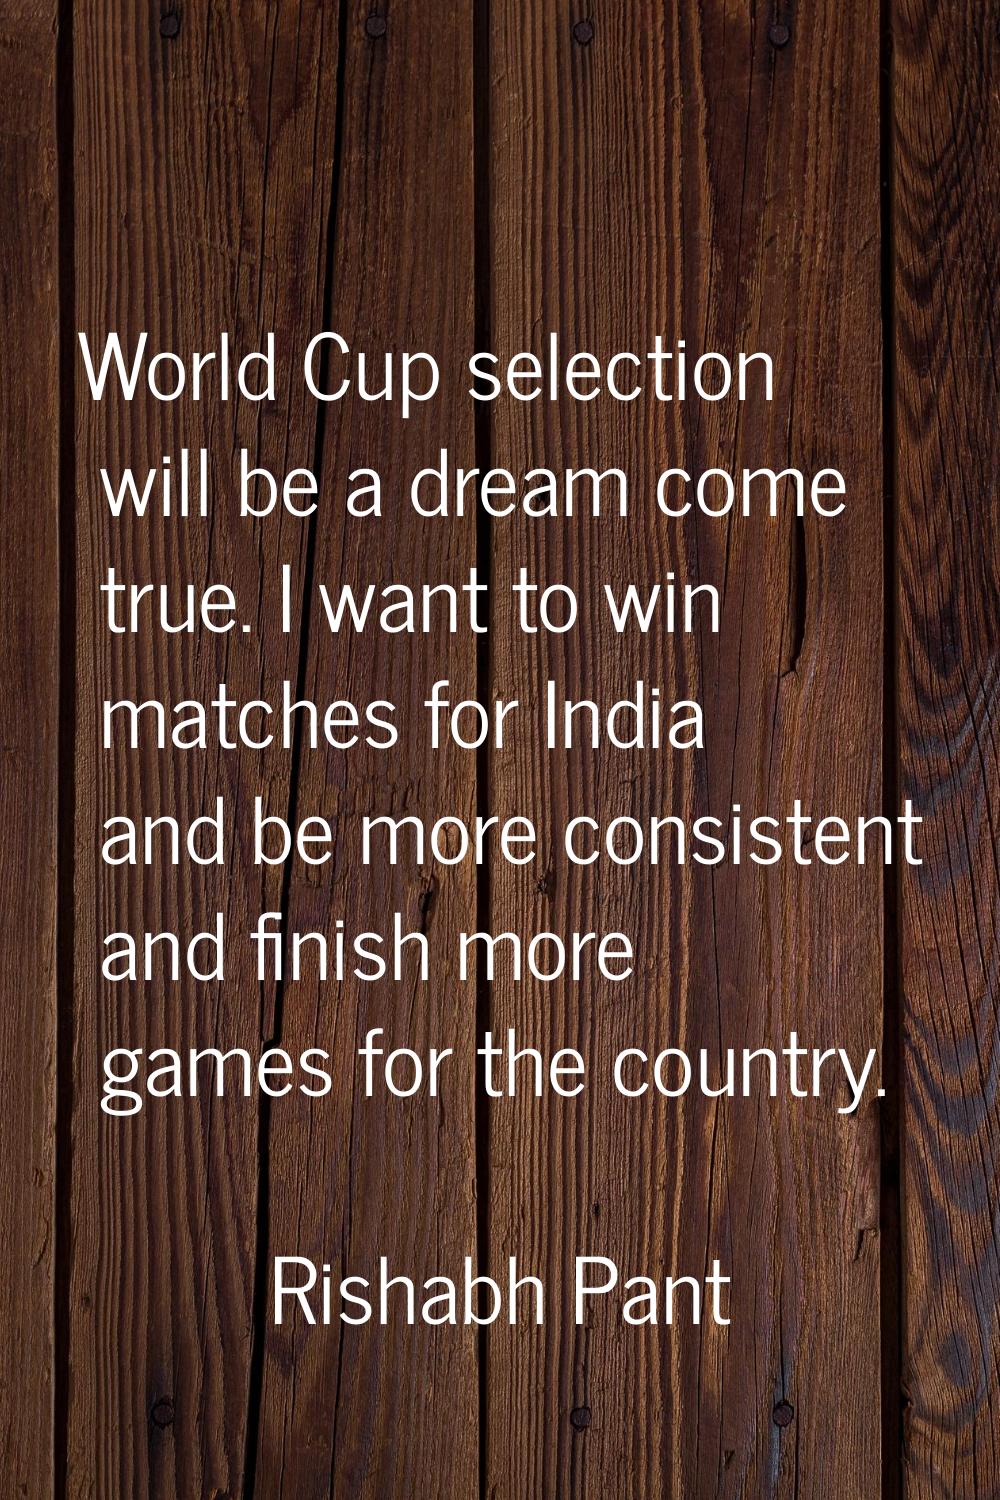 World Cup selection will be a dream come true. I want to win matches for India and be more consiste